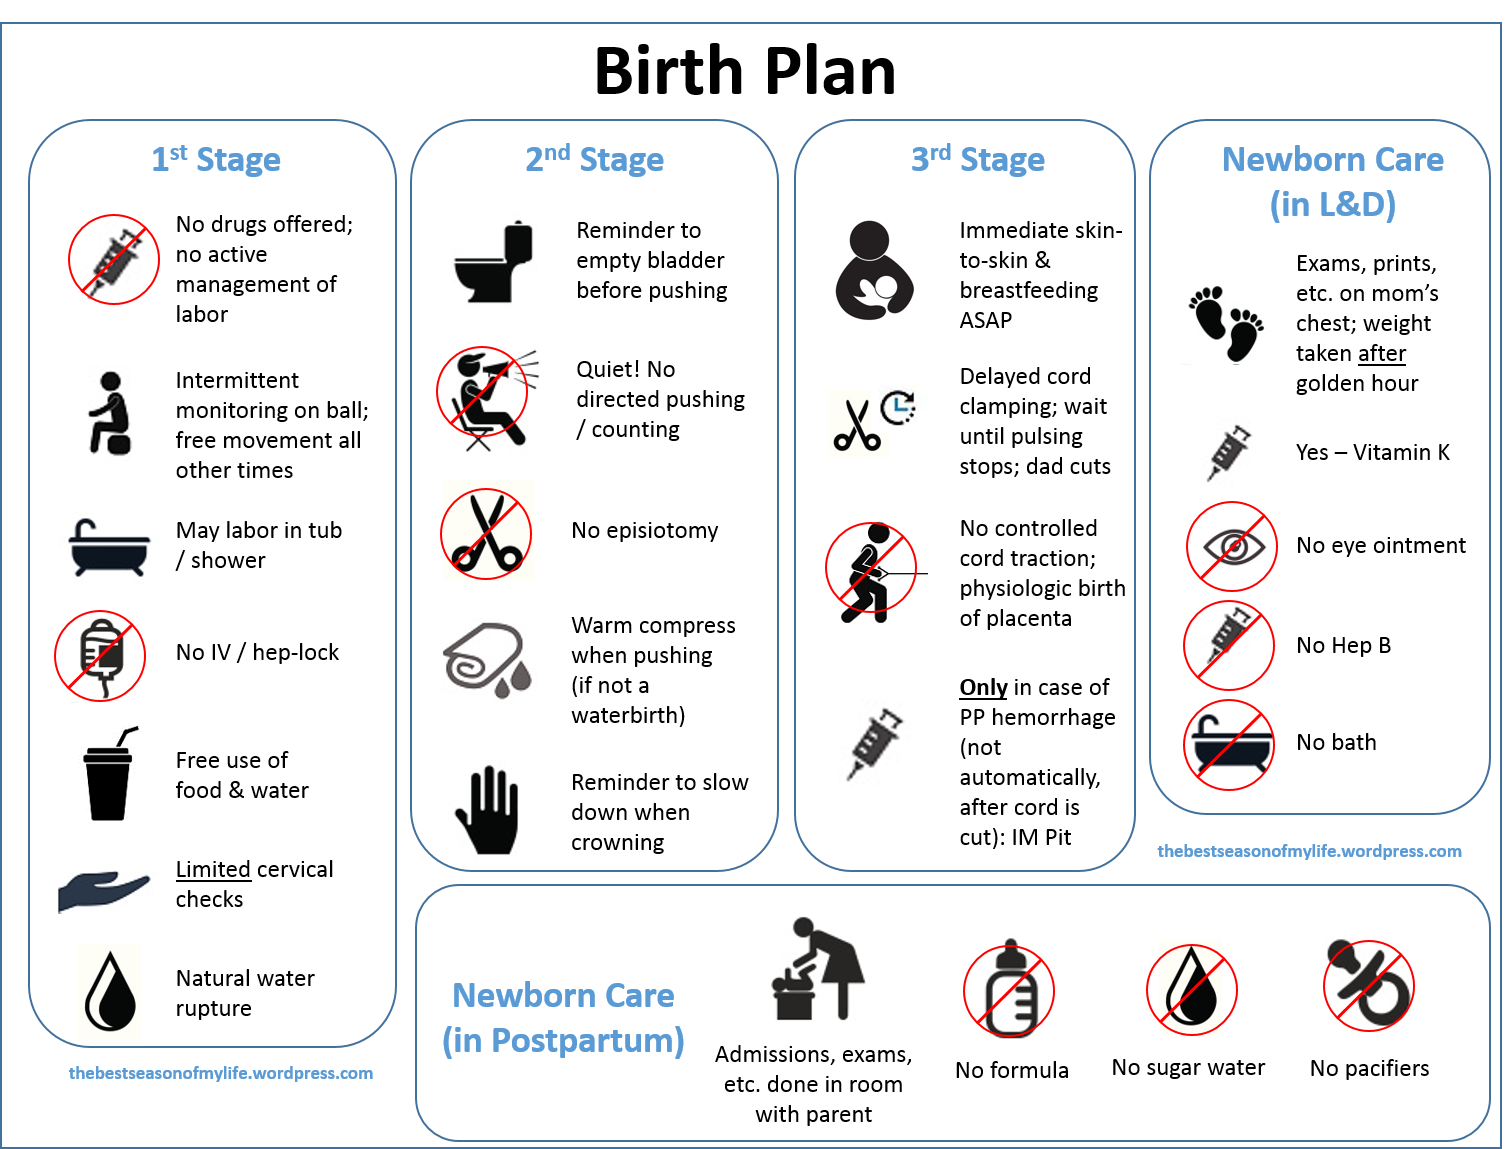 A Downloadable Visual Birth Plan  The best season of my life